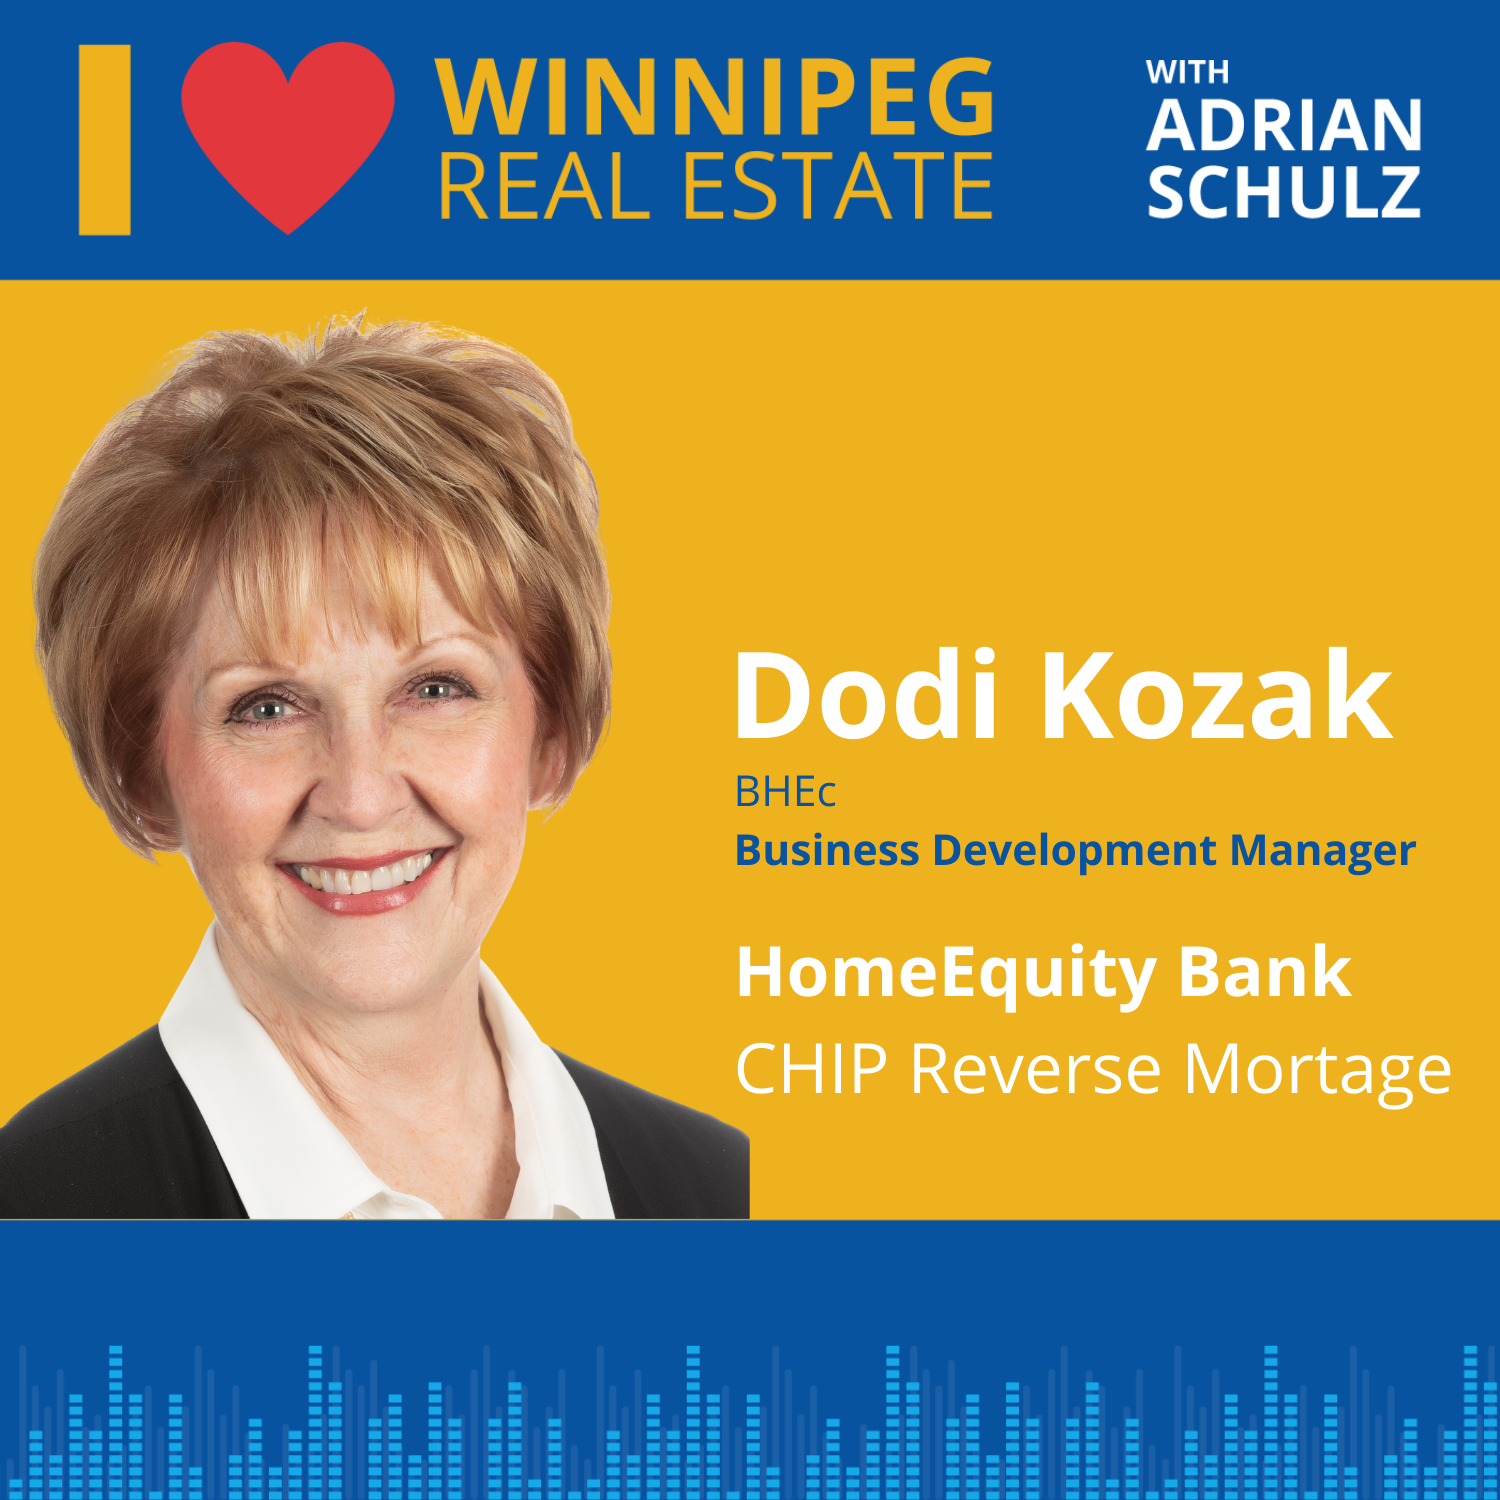 Dodi Kozak on the CHIP Reverse Mortgage by HomeEquity Bank Image